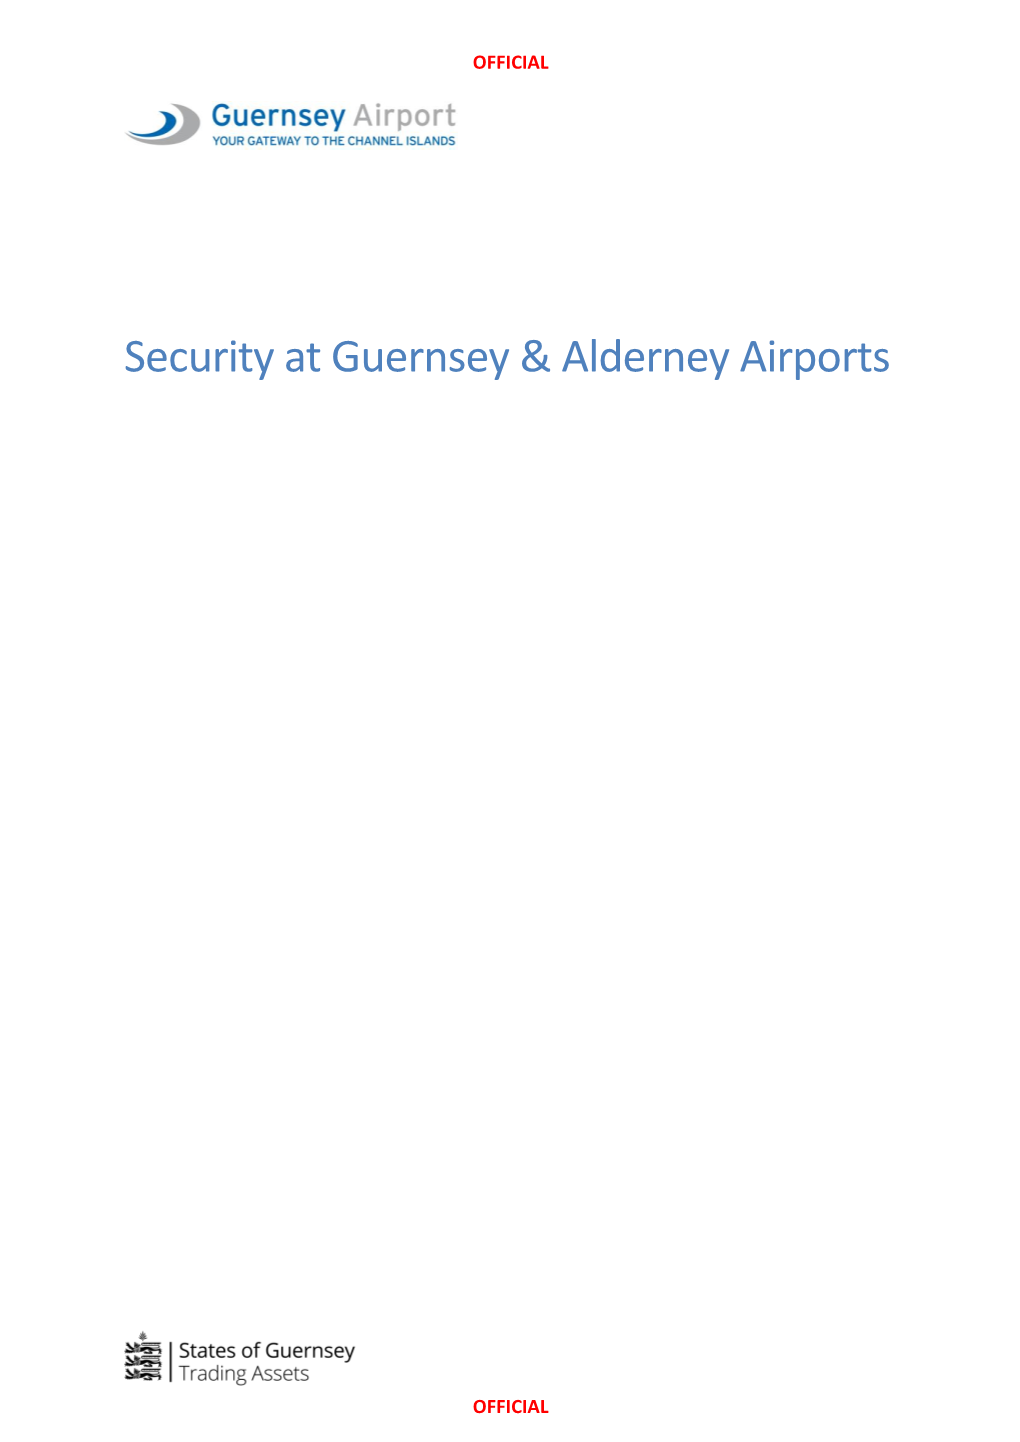 Security at Guernsey & Alderney Airports